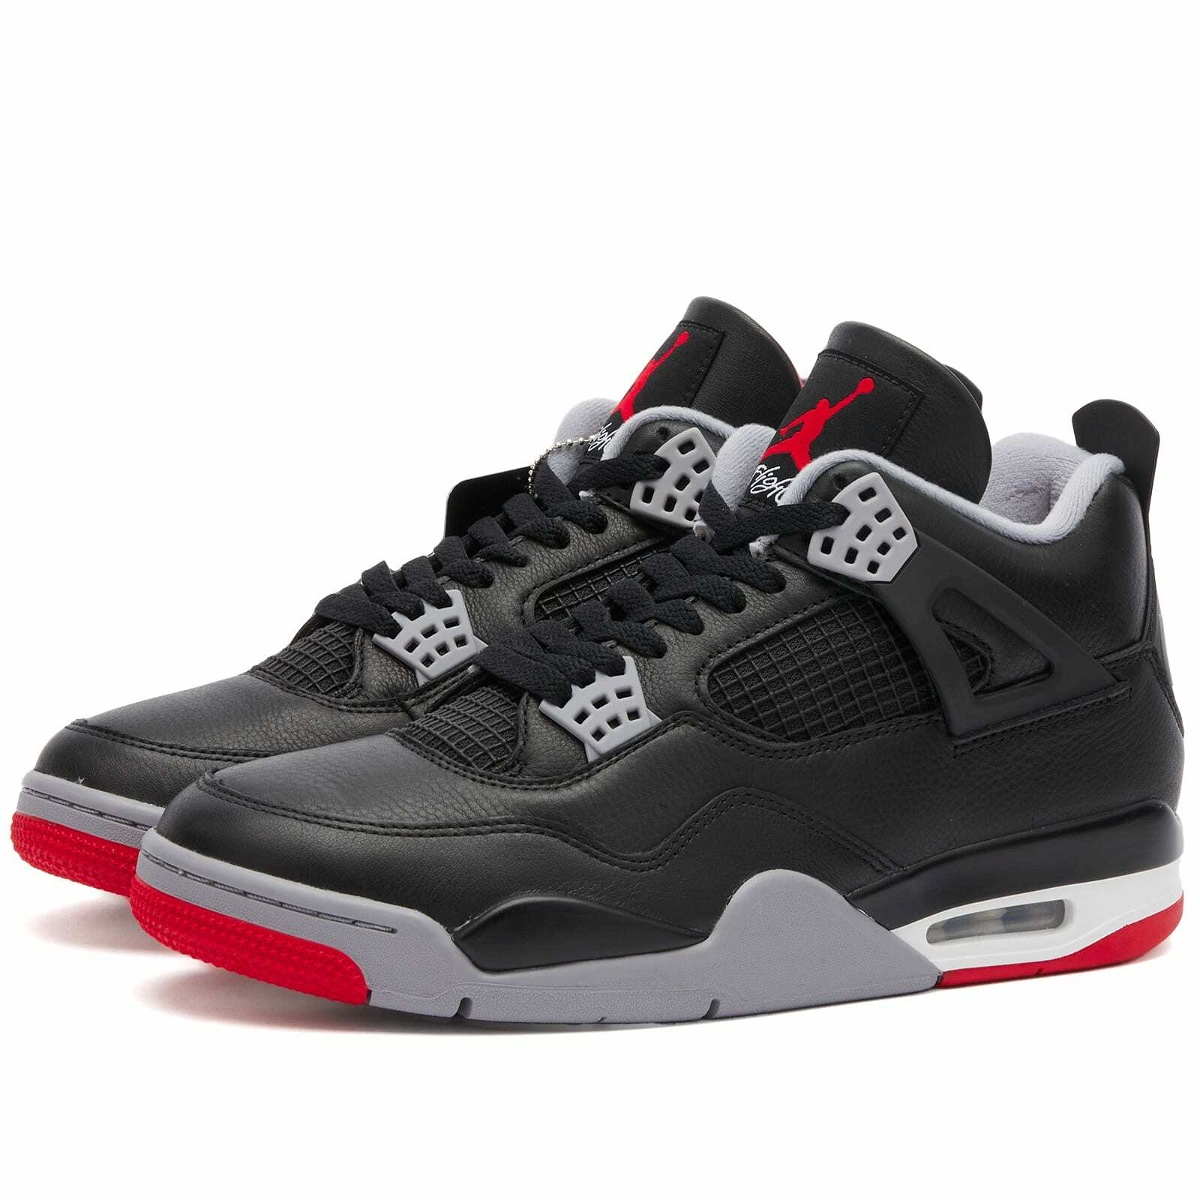 Photo: Air Jordan 4 Retro "Bred Reimagined" Sneakers in Black/Fire Red/Summit White